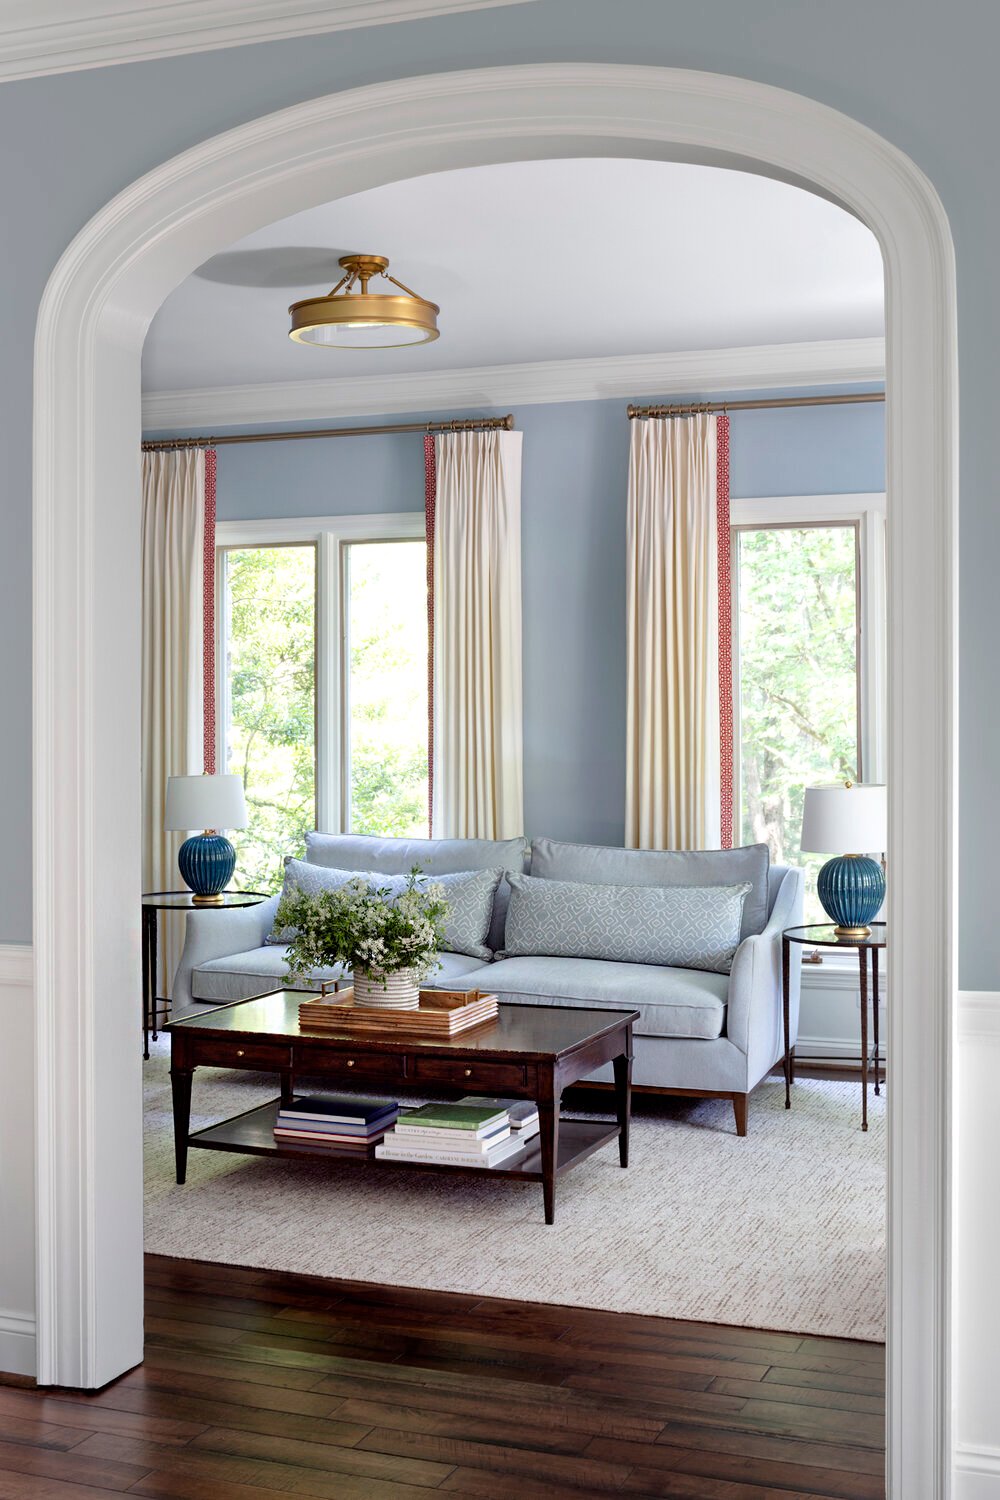 The 9 Best Ceiling Paint Colors (Beyond White), According to Designers